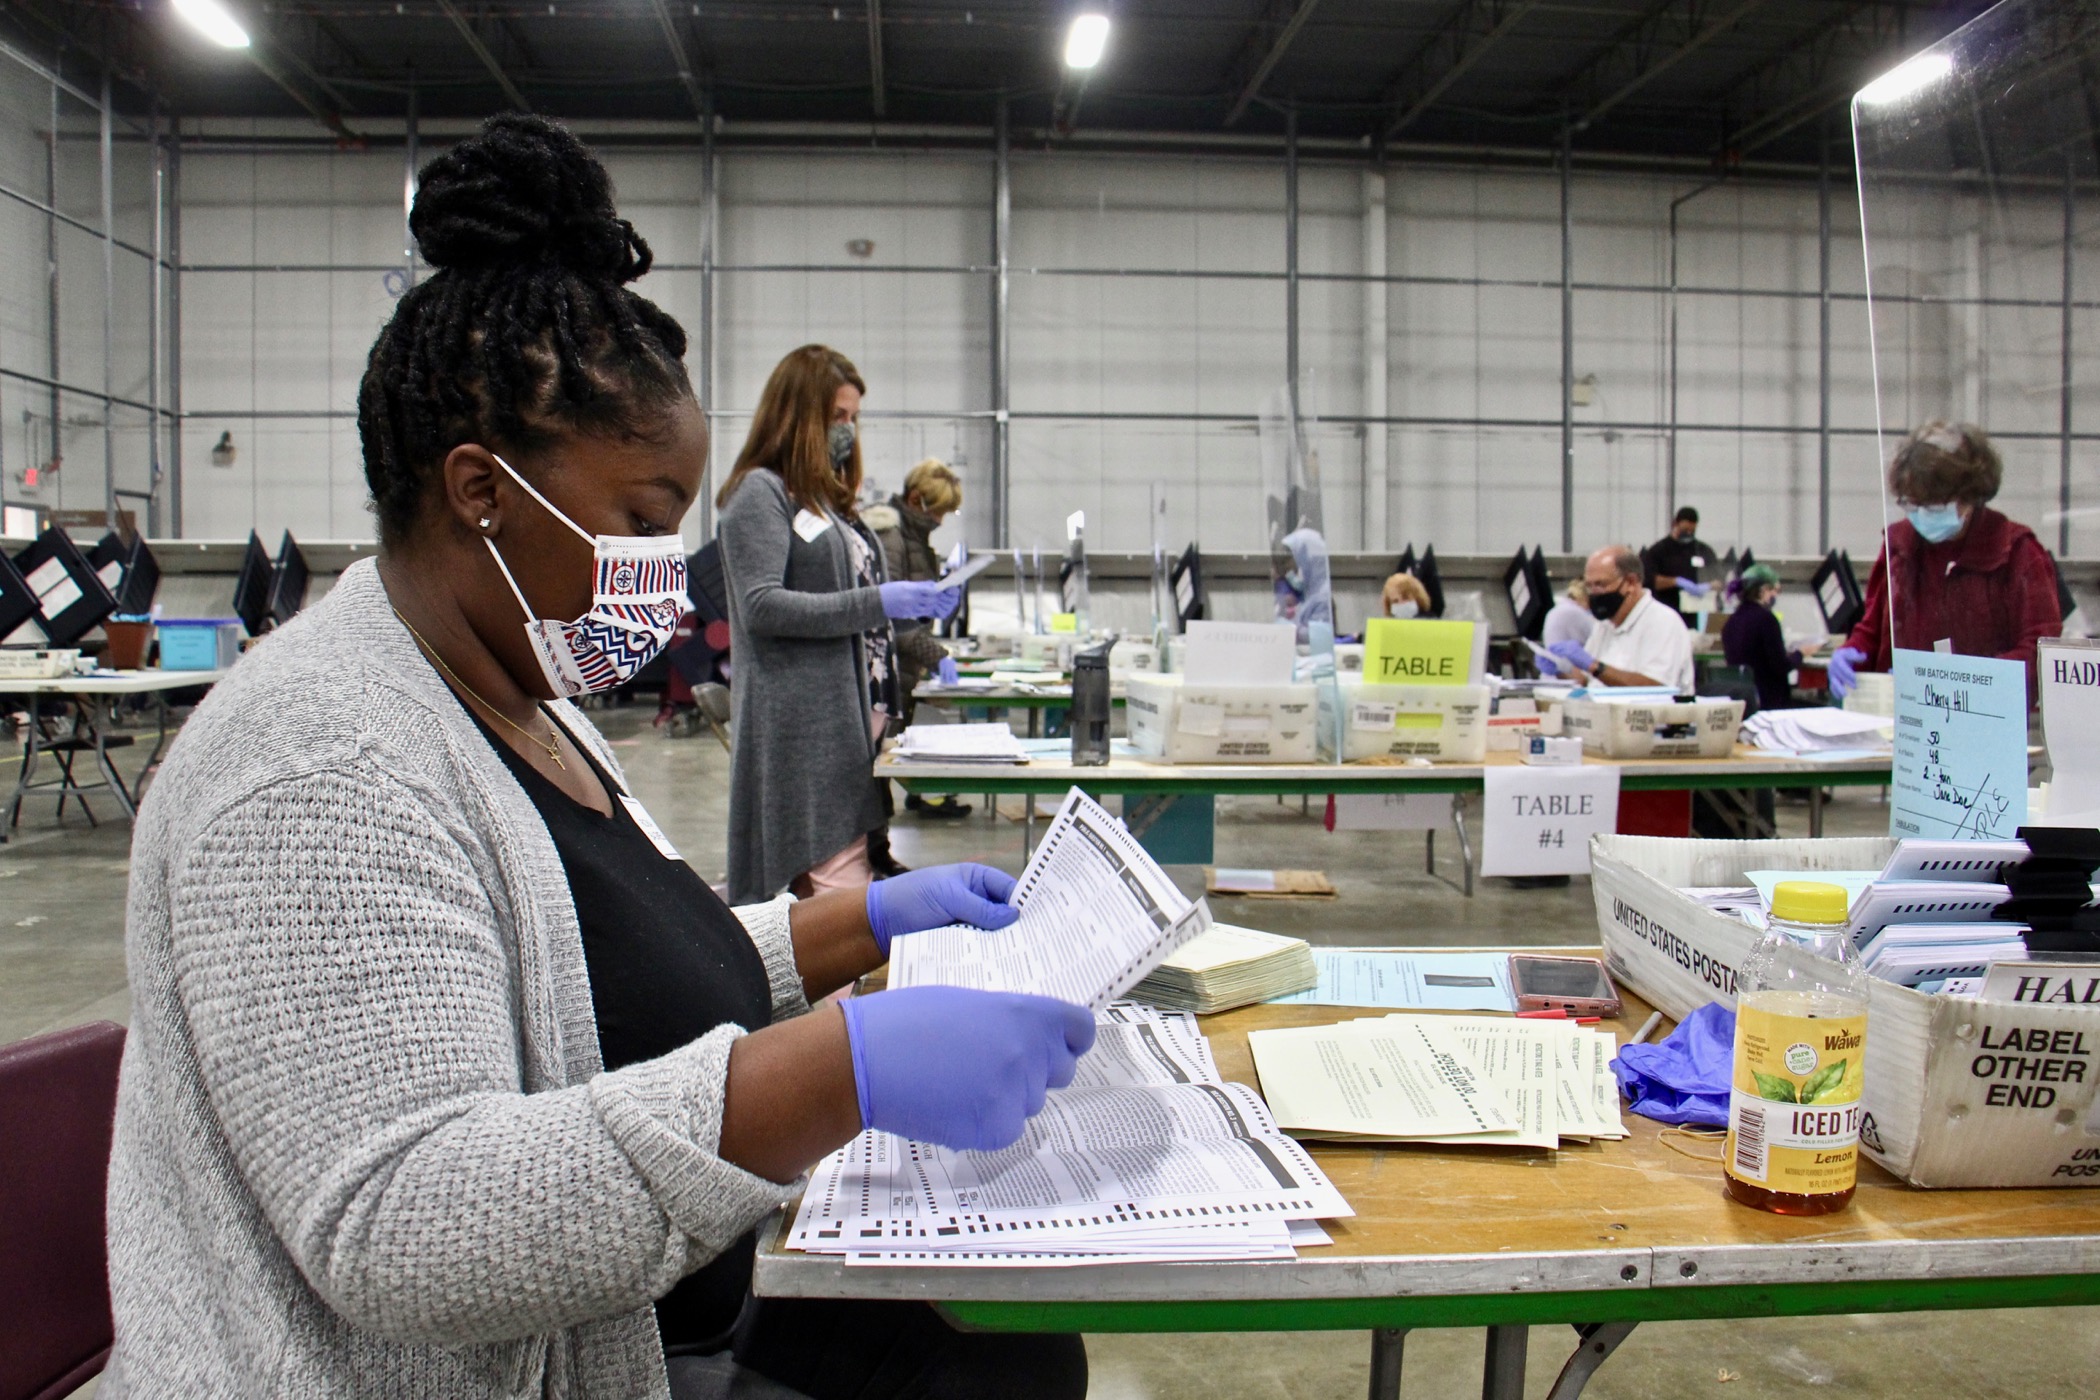 OPINION: Some states took the wrong approach to counting mail-in ballots